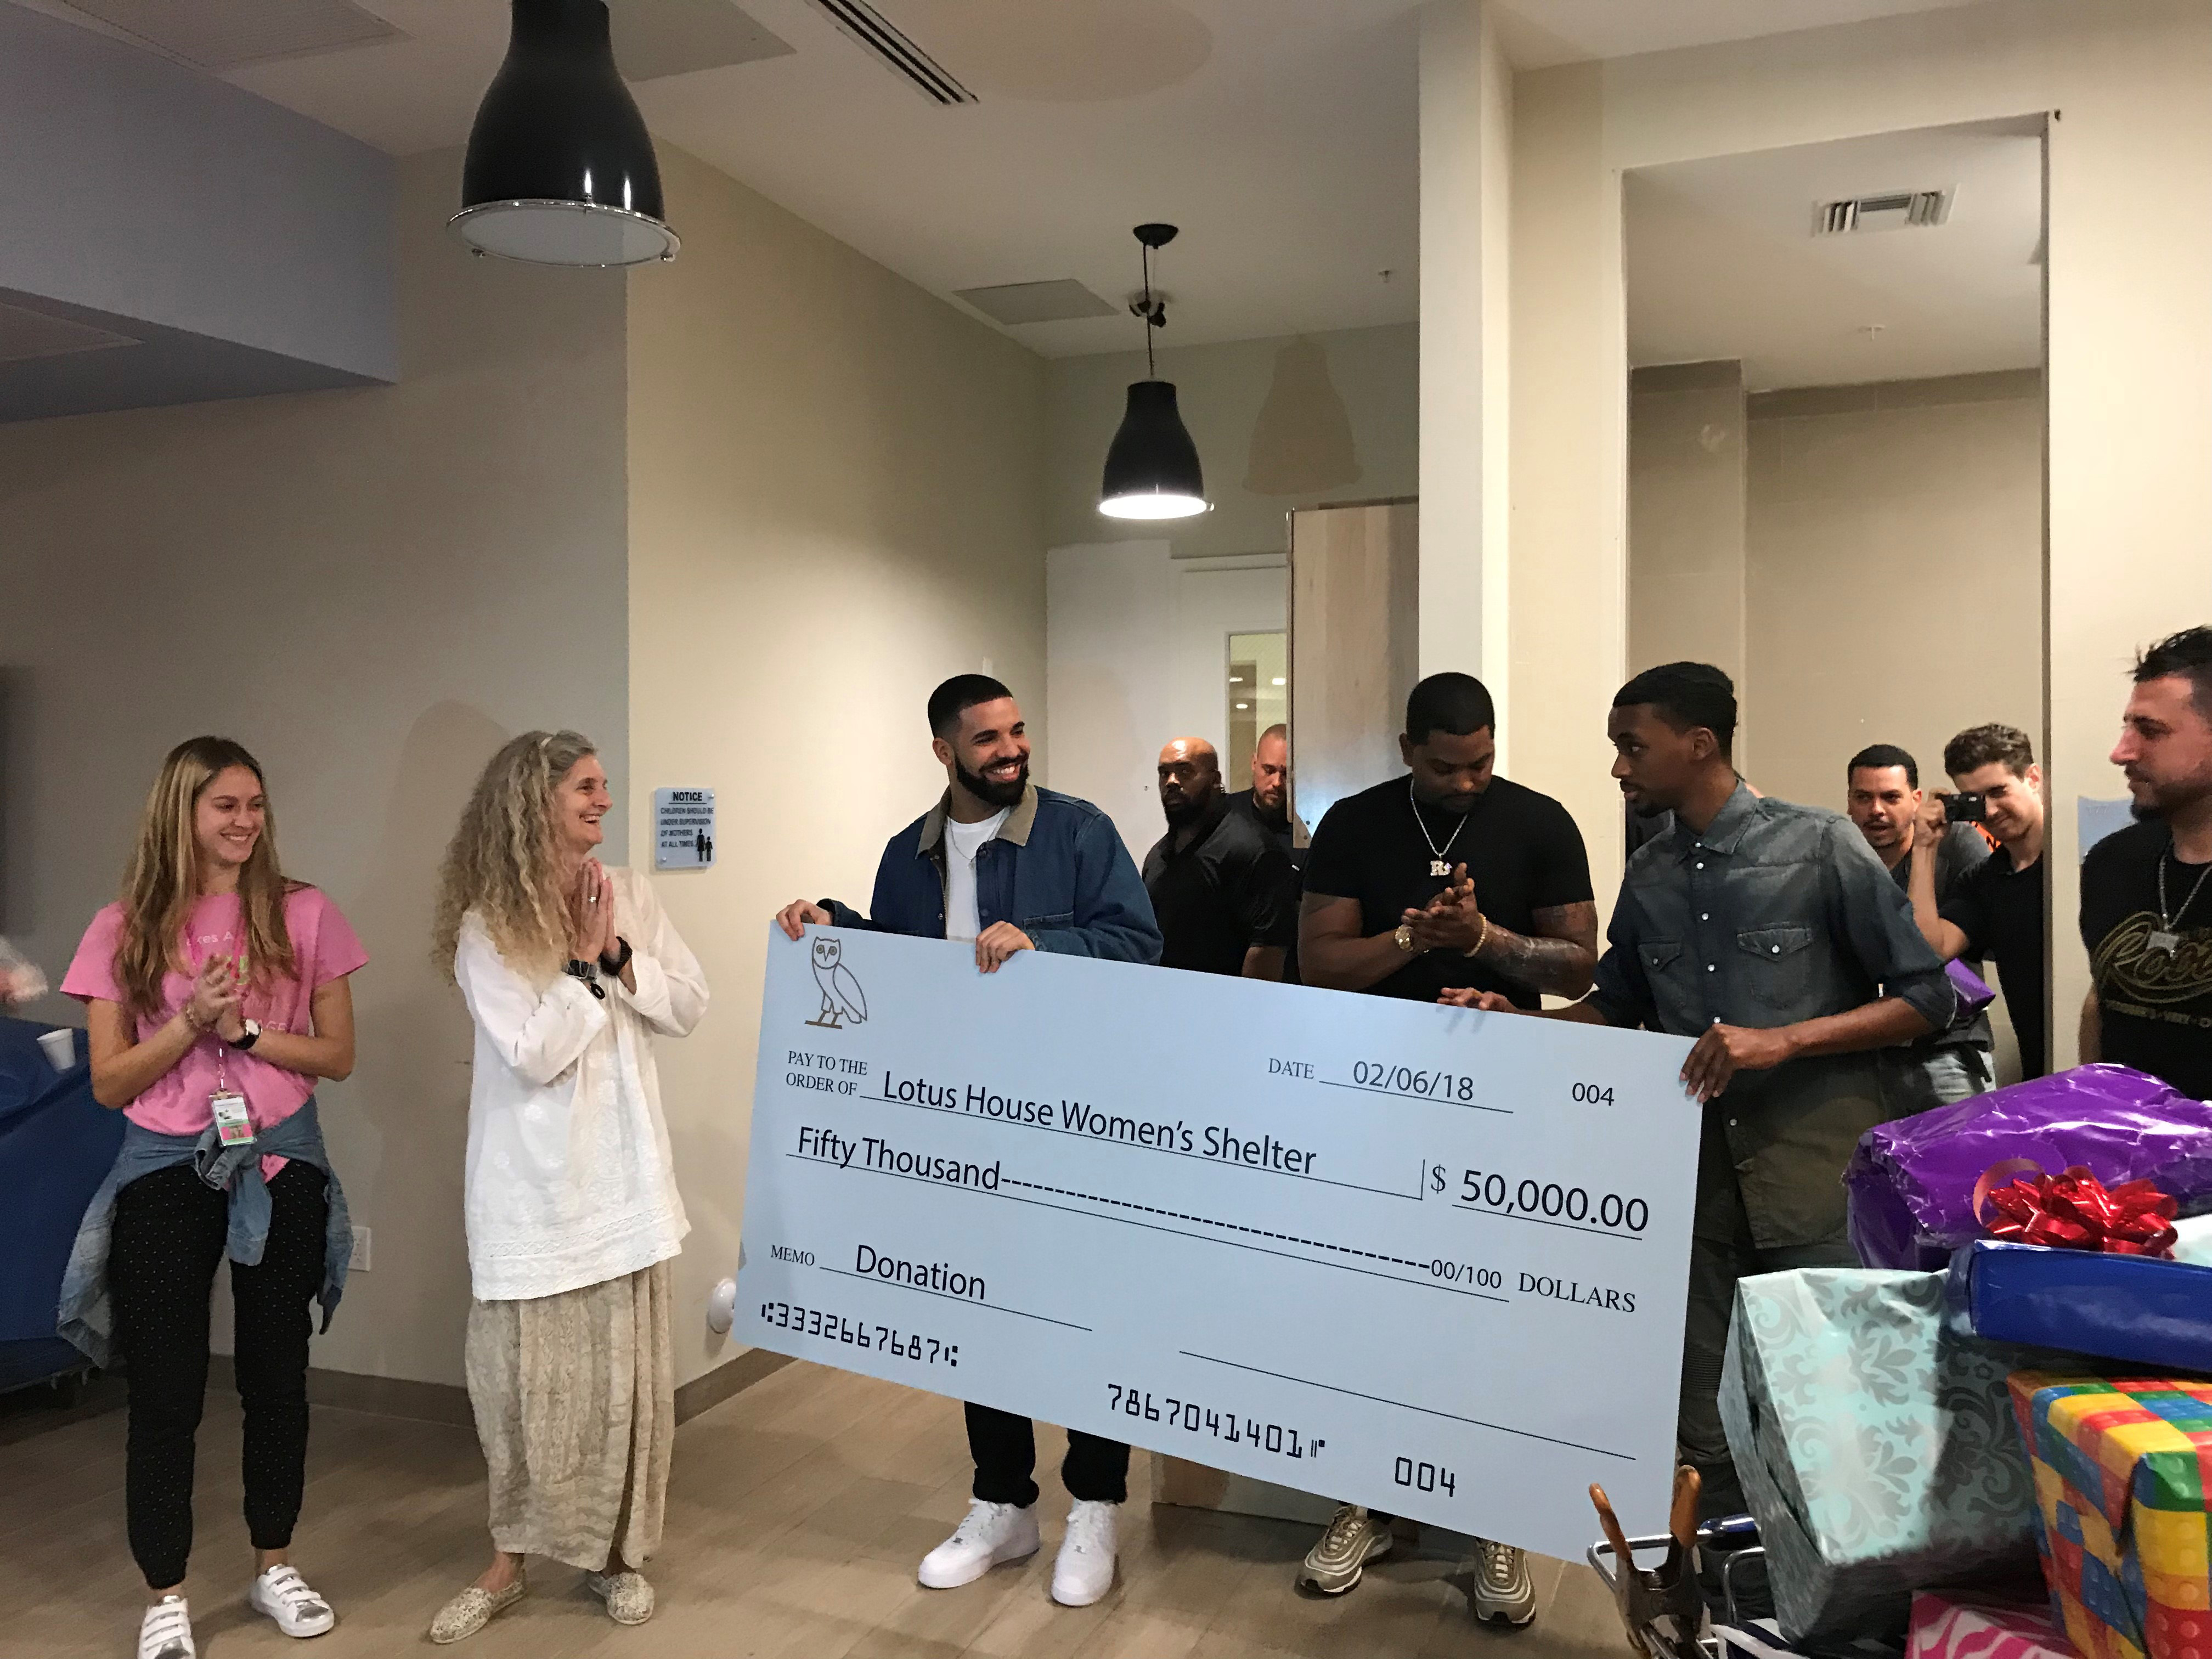 Drake Visited Miami and Gave Away $200,000 to a Bunch of People